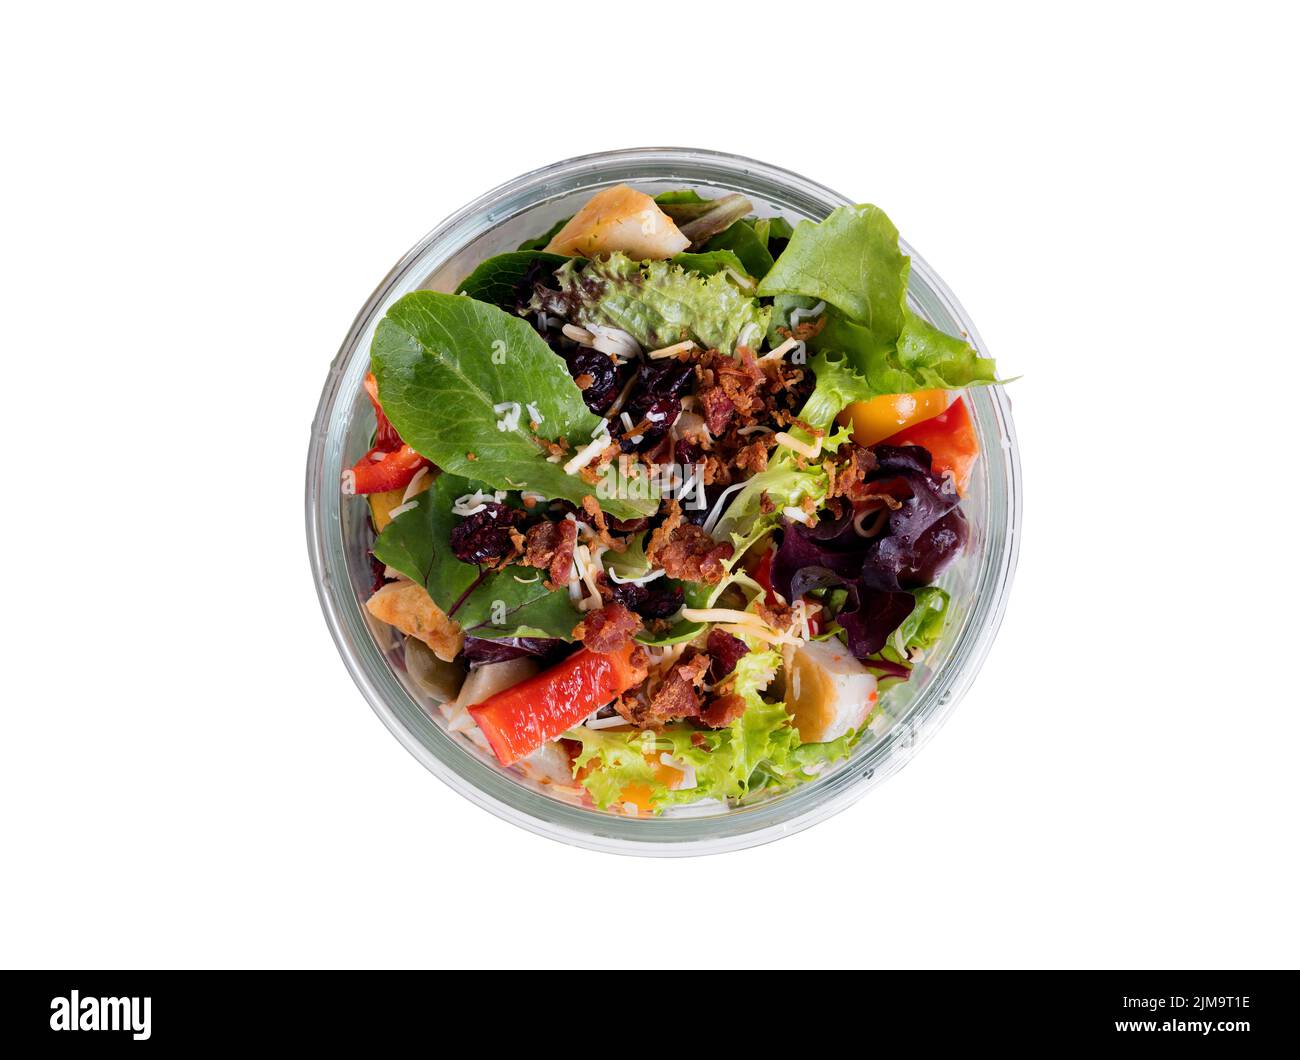 Top view of mixed salad in glass container isolated on white background Stock Photo